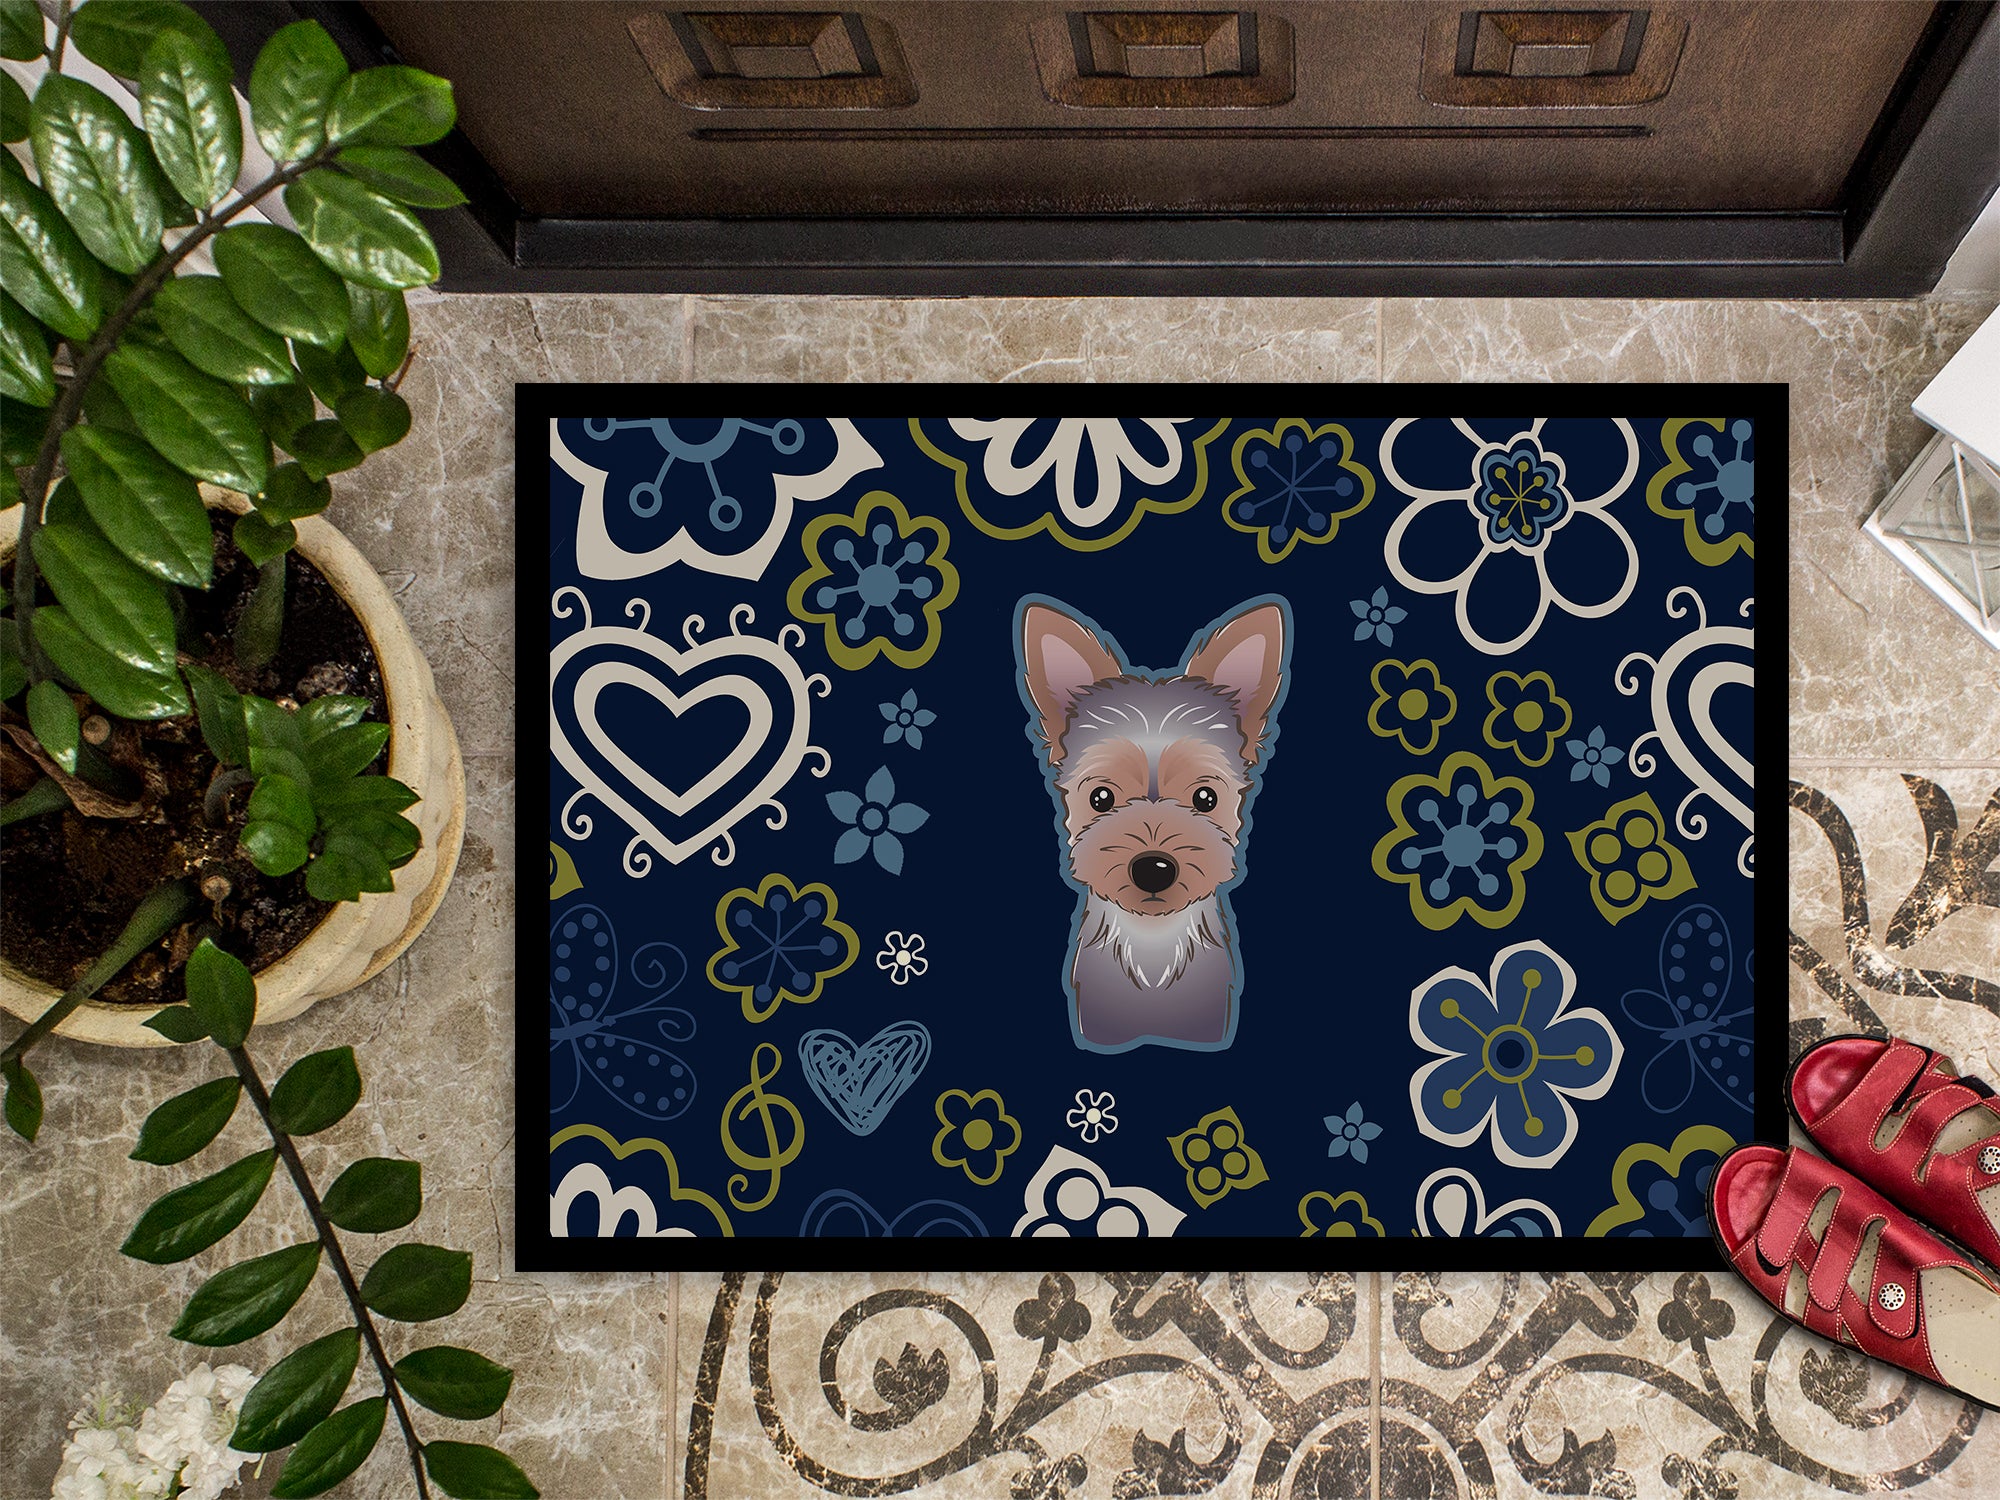 Blue Flowers Yorkie Puppy Indoor or Outdoor Mat 18x27 BB5083MAT - the-store.com